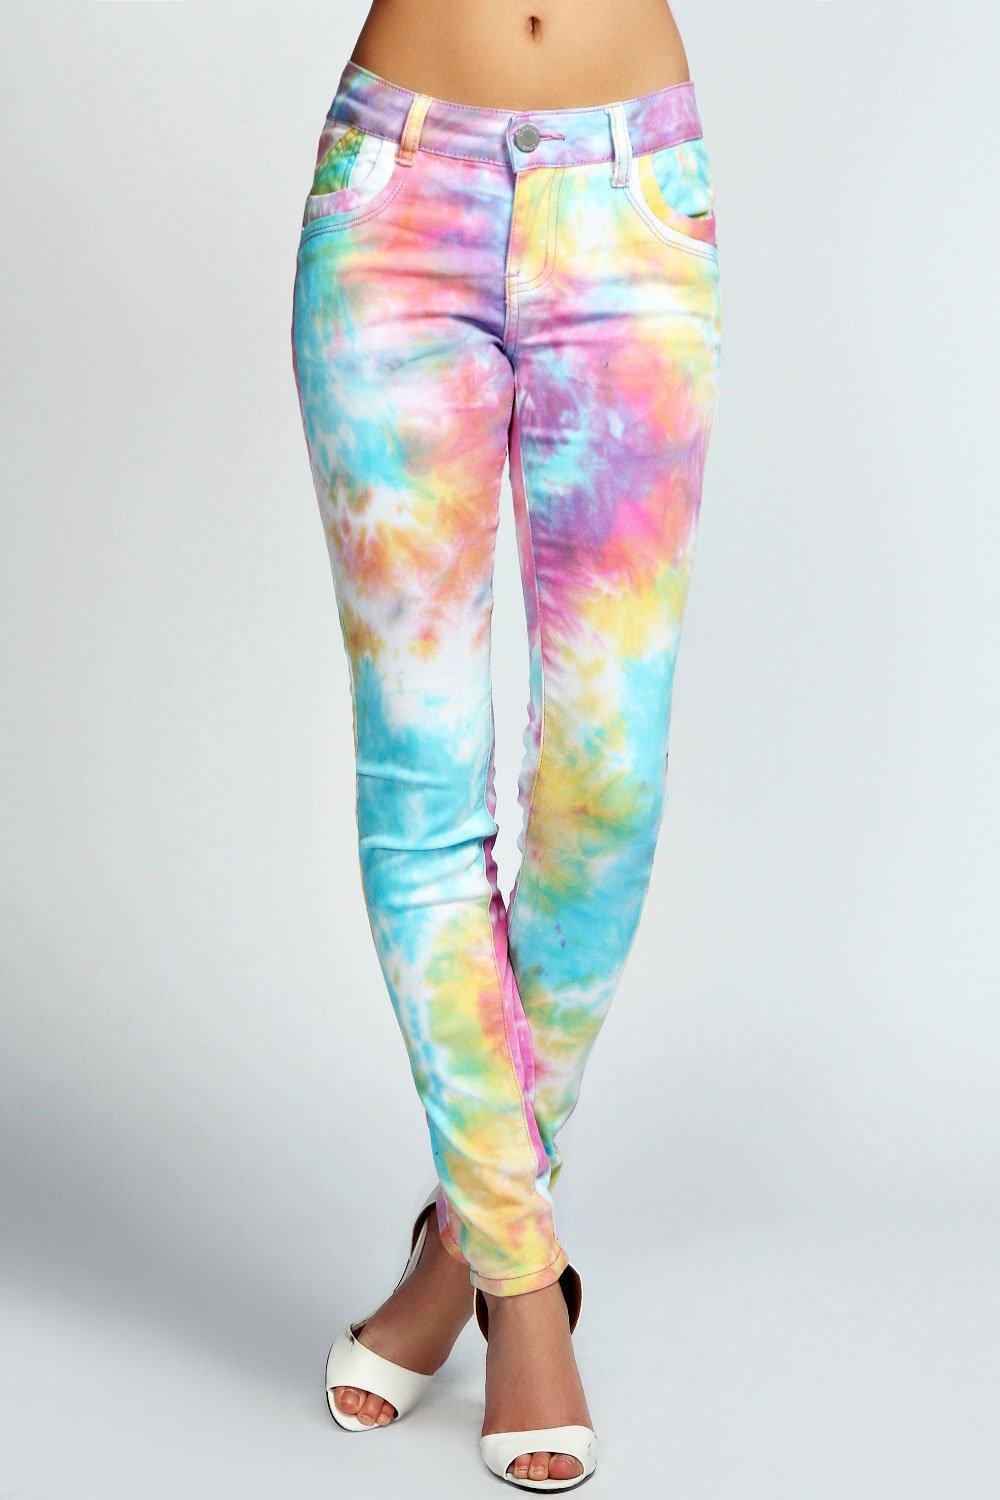 Abigail All Over Tie Dye Print Jeans at boohoo.com